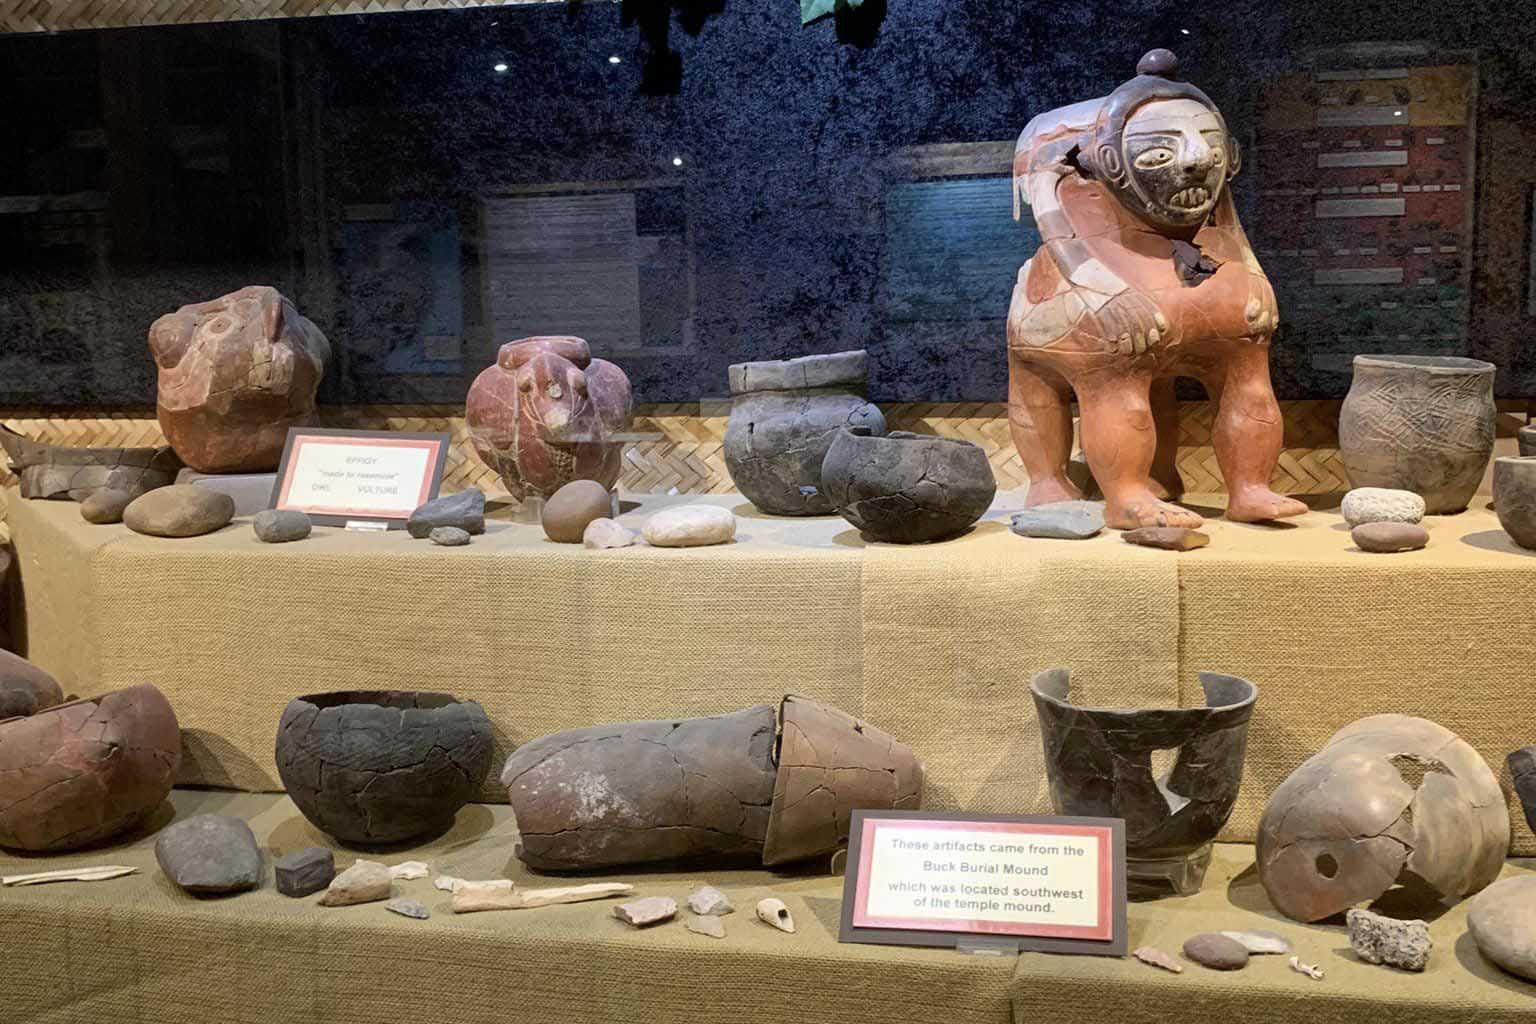 The Indian Temple Mound Museum Pottery